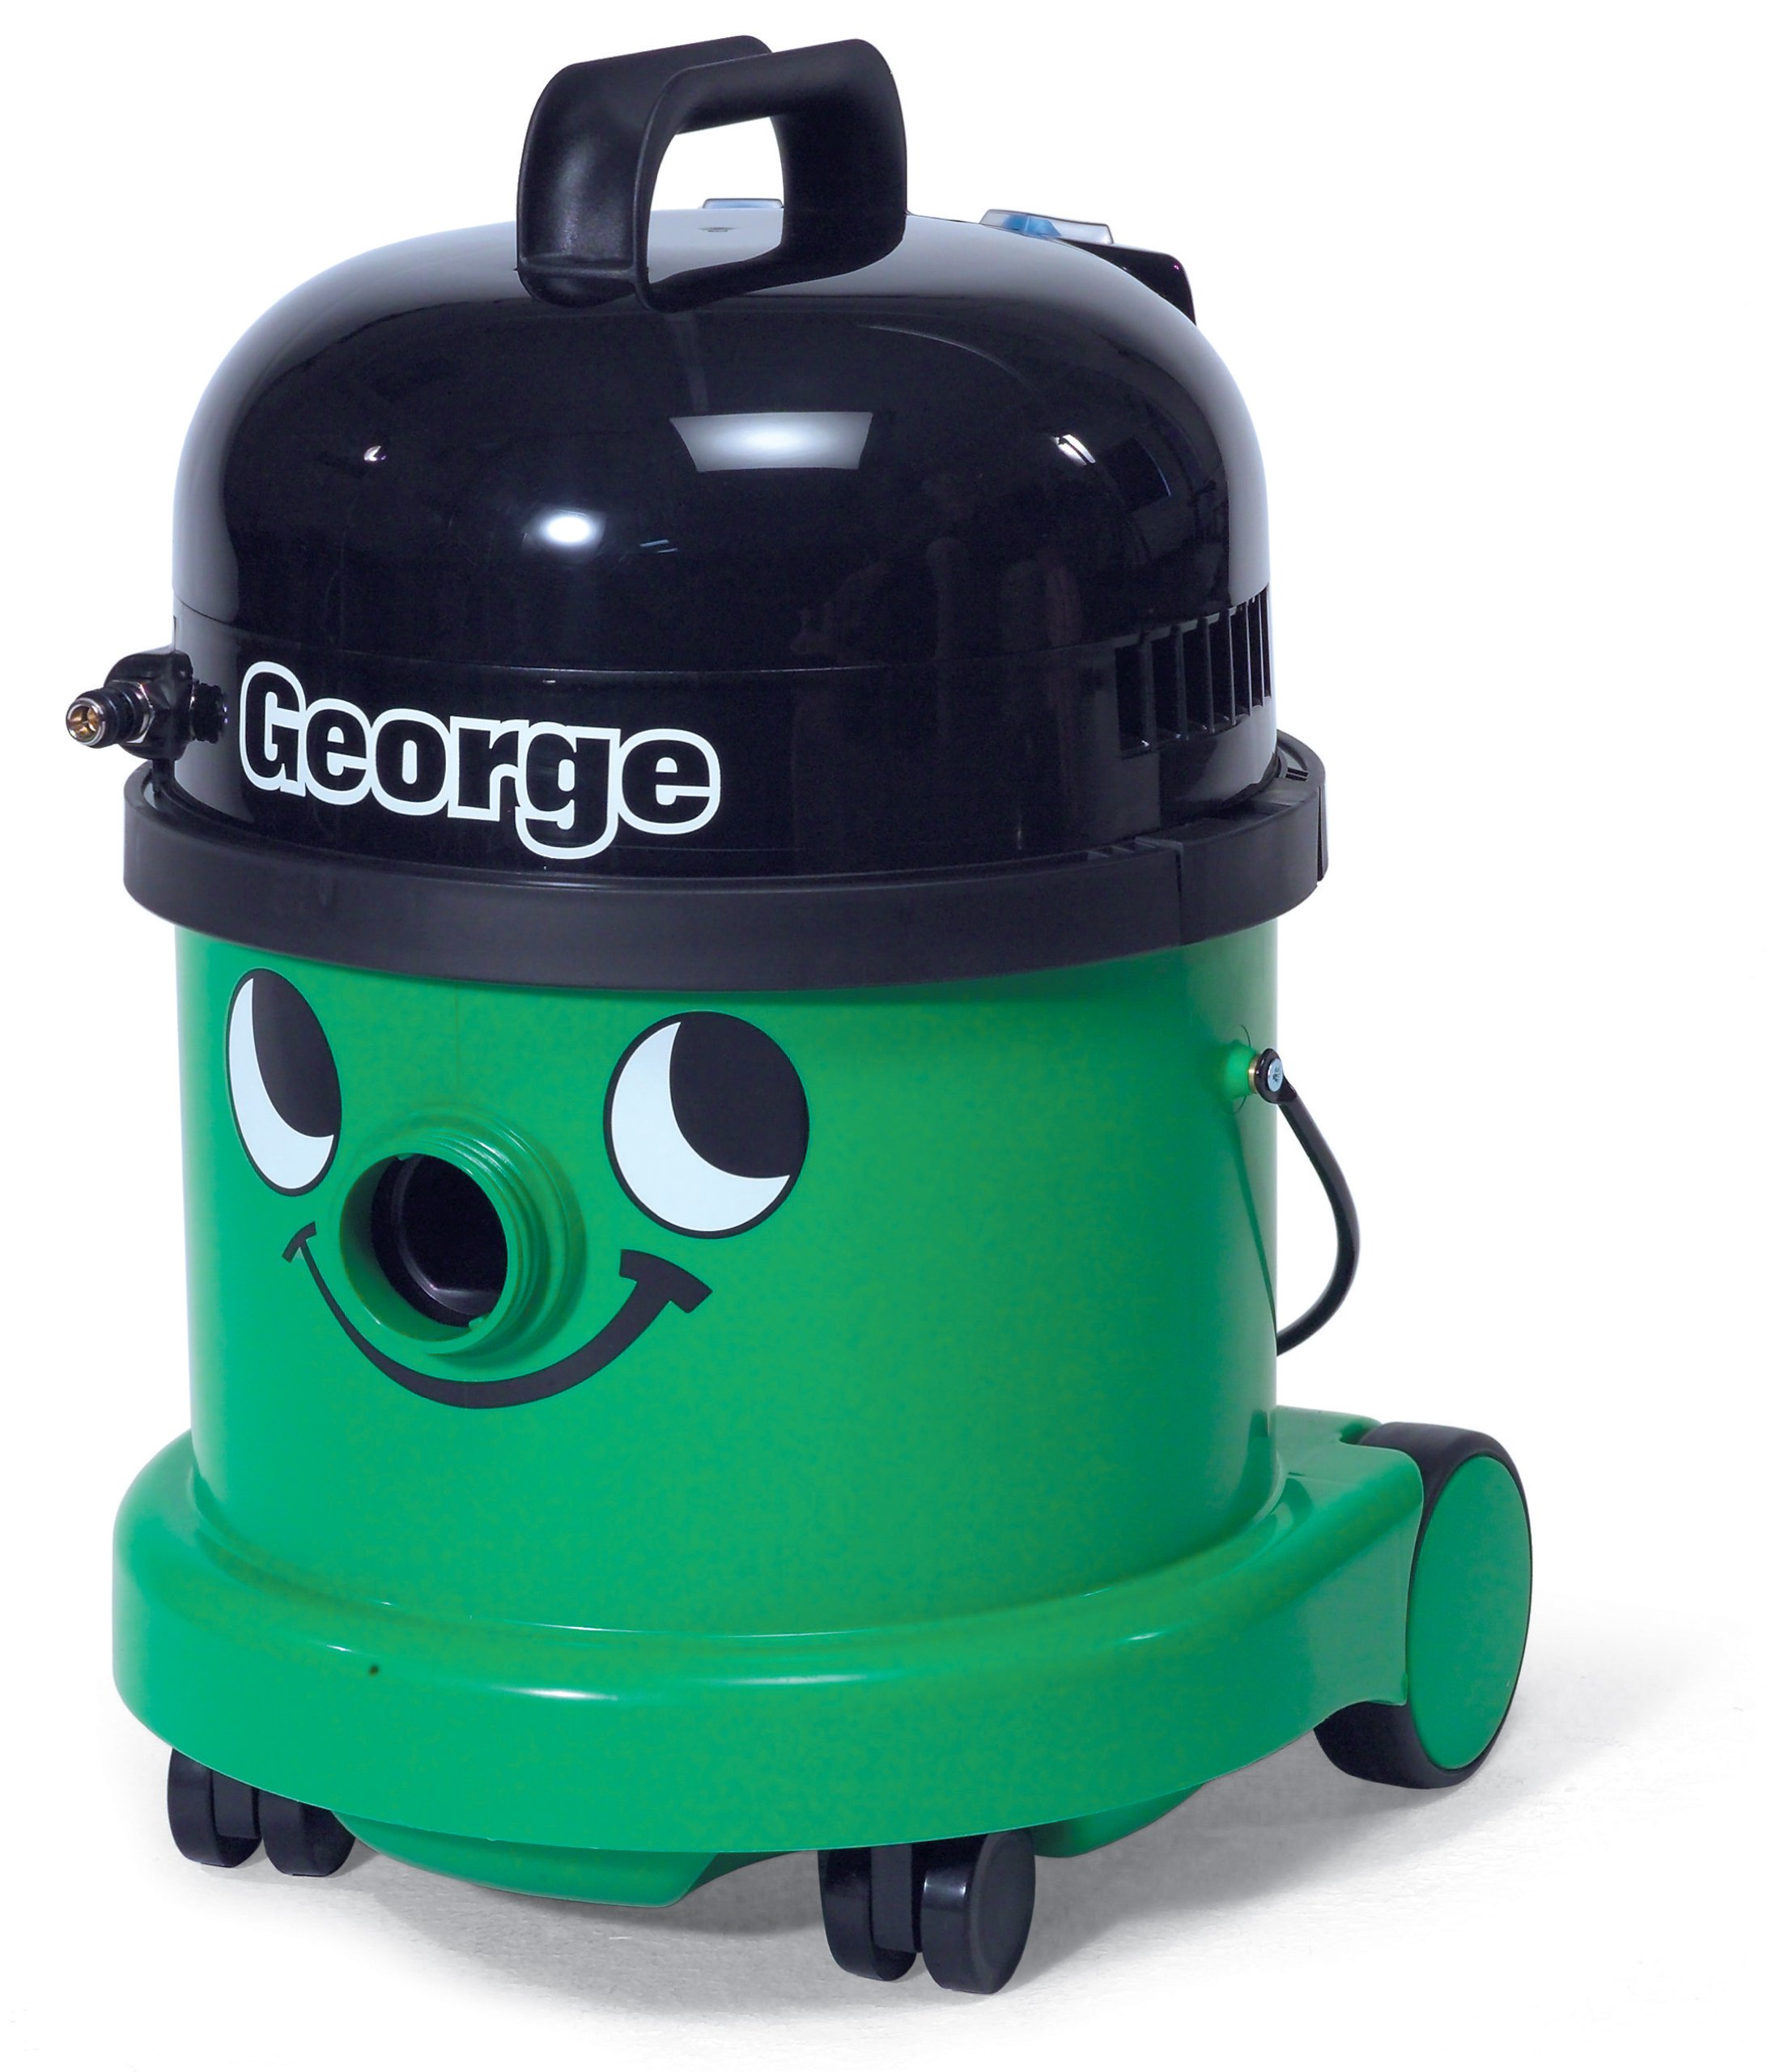 NaceCare GVE 370 "George" Wet/Dry/ Extractor Vacuum with a 26A kit - image 2 of 3